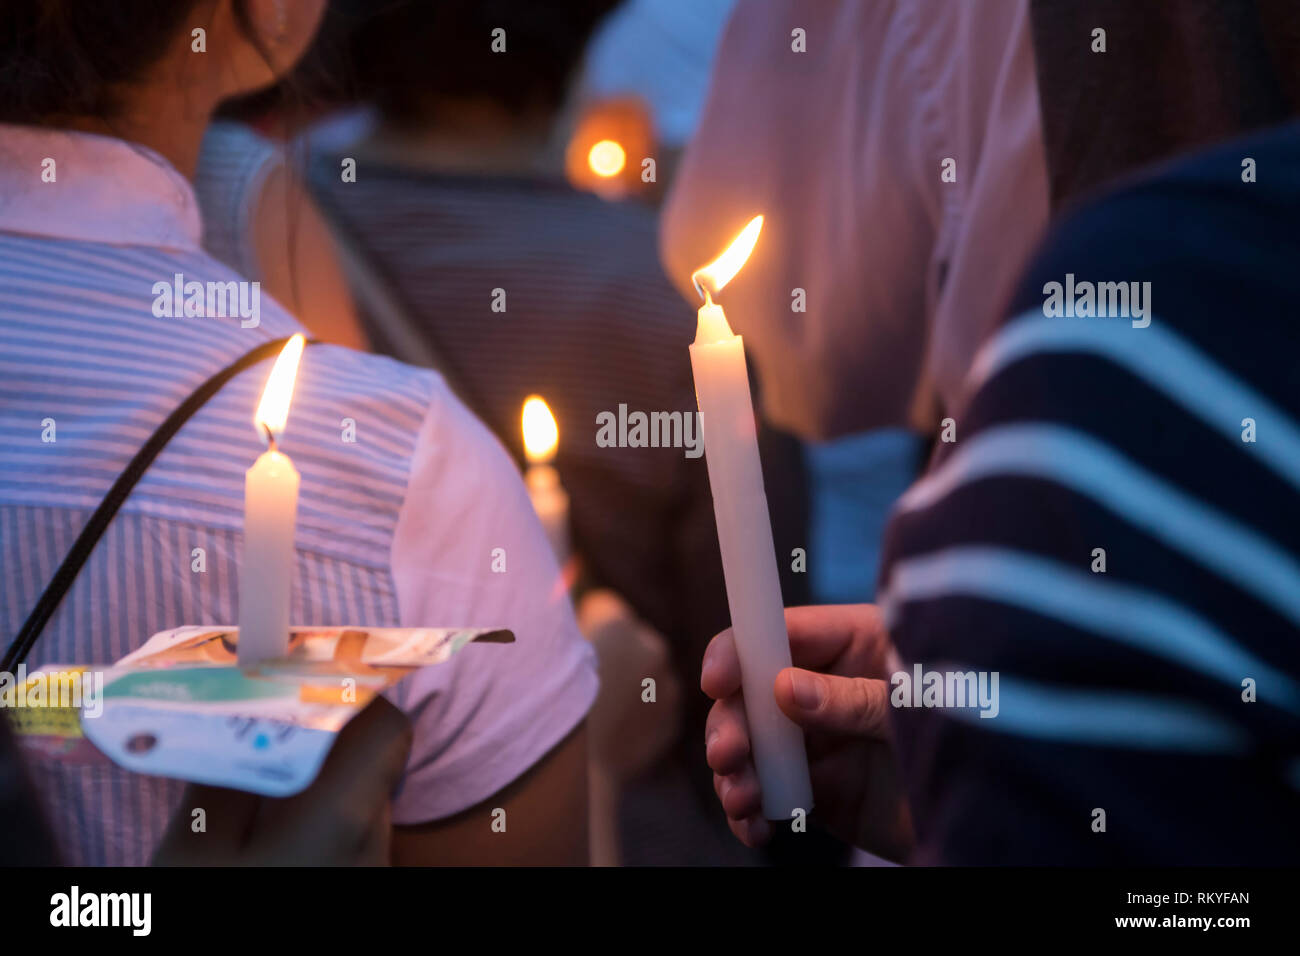 People with candles in their hands.  On July 6, 2018, a candlelight vigil was held in 25 cities of Colombia and the world as a form of protest for the Stock Photo